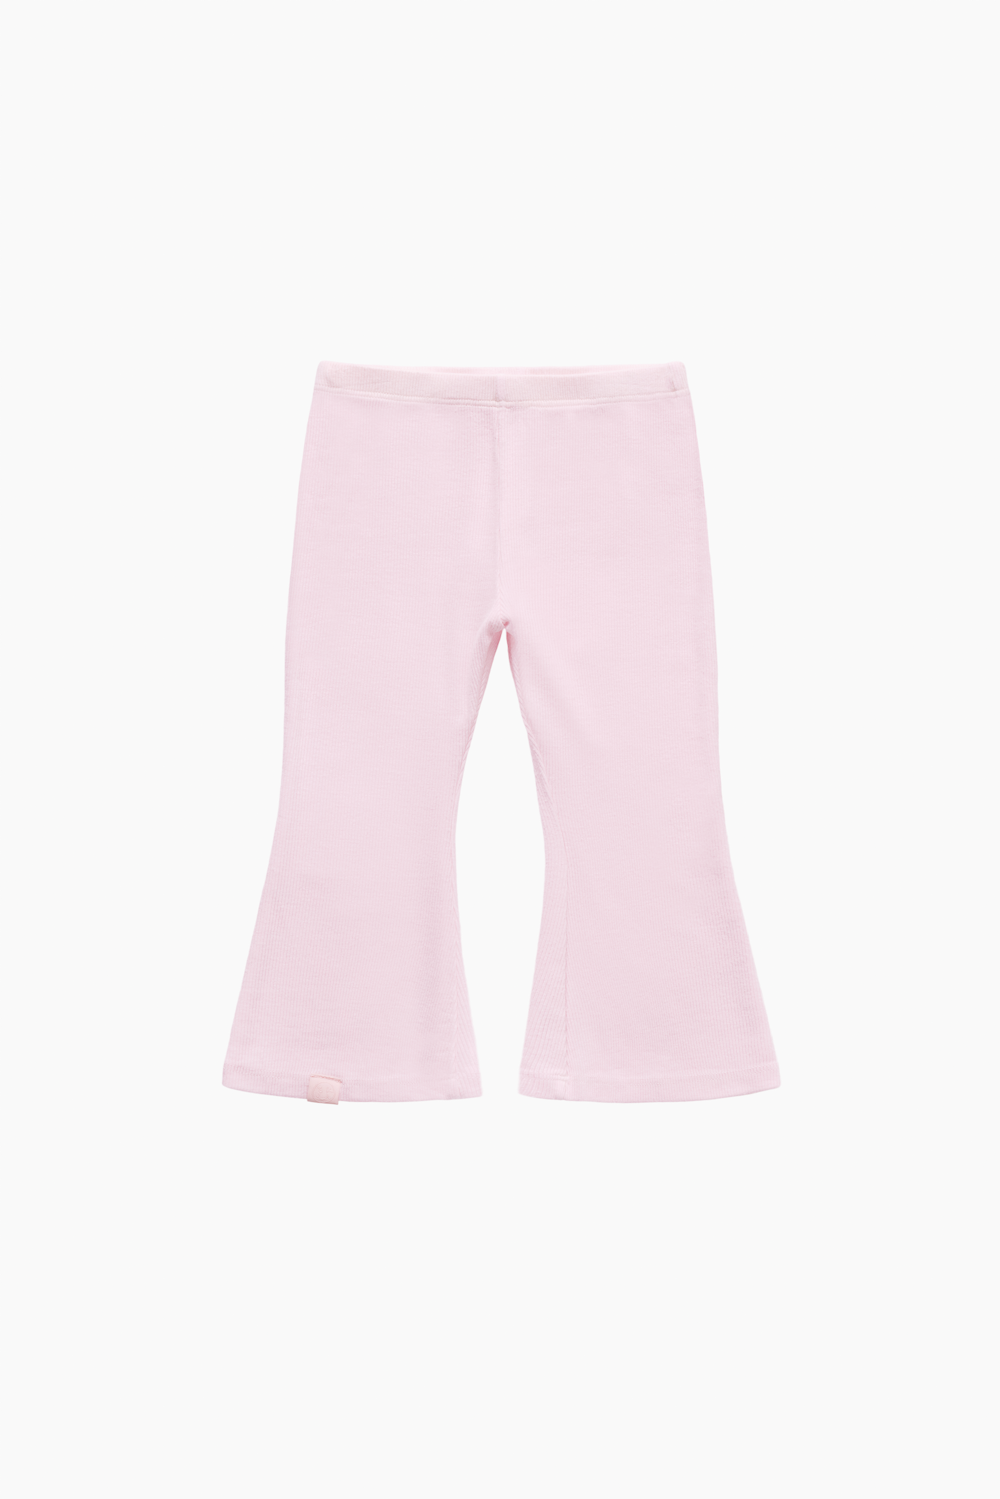 RIBBED MODAL KIDS FLARE PANTS - BALLERINA Featured Image